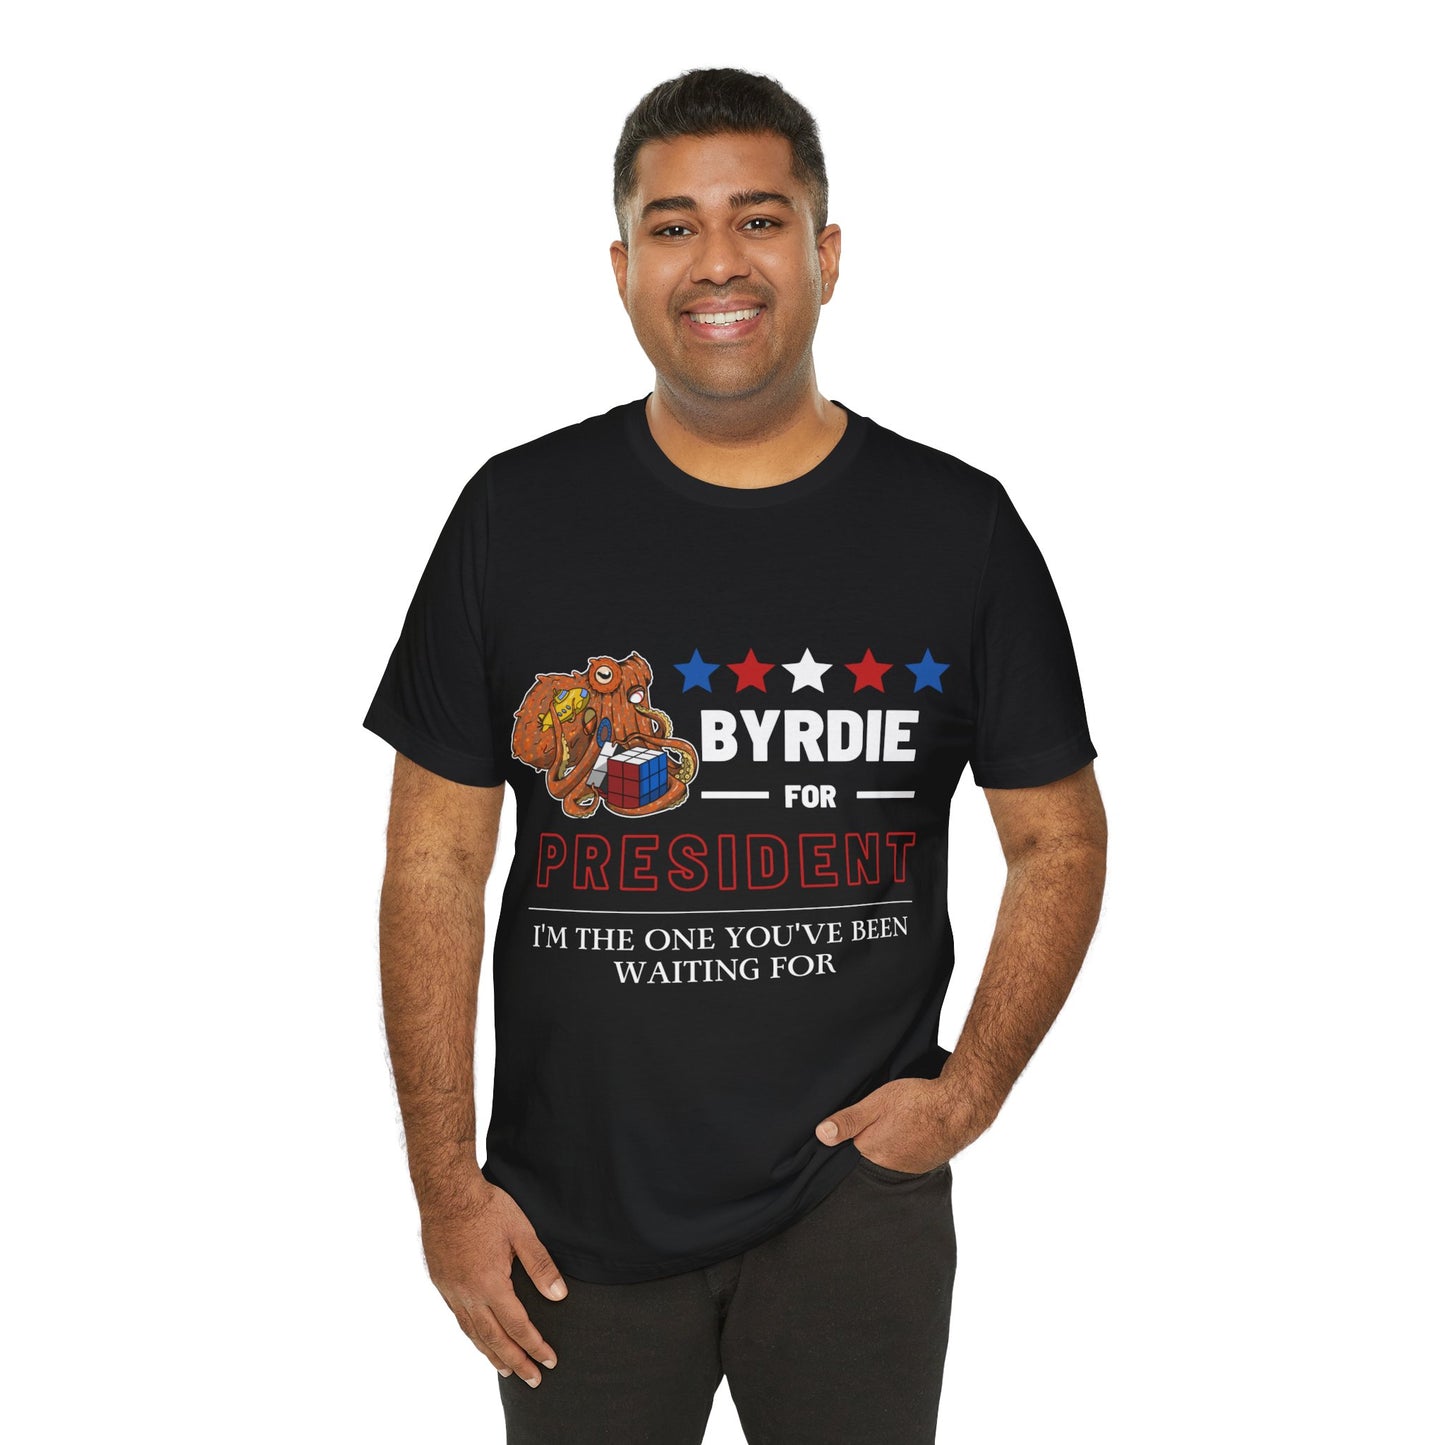 Byrdie for President - Been Waiting For